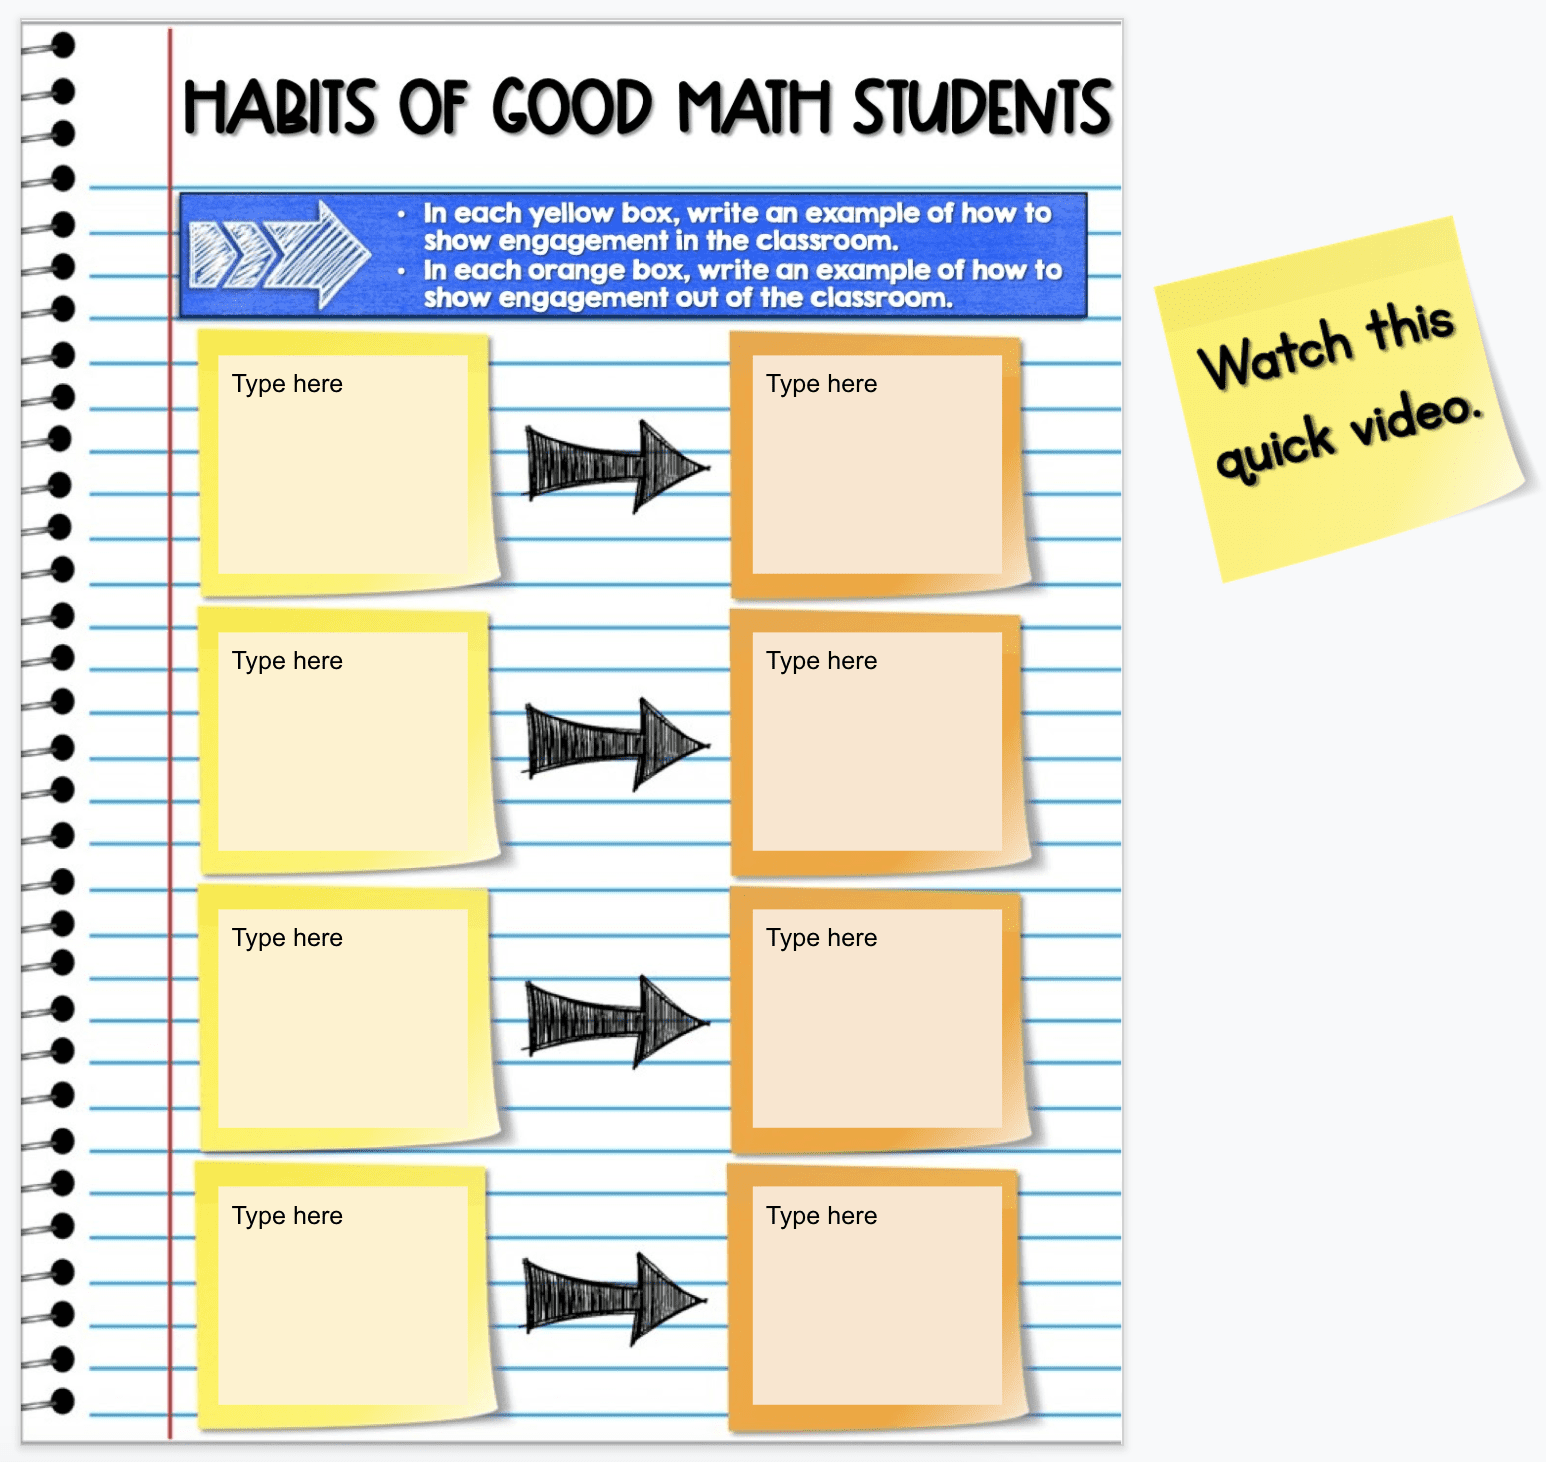 Habits of good math students interactive worksheet with multiple text fields to input good habits